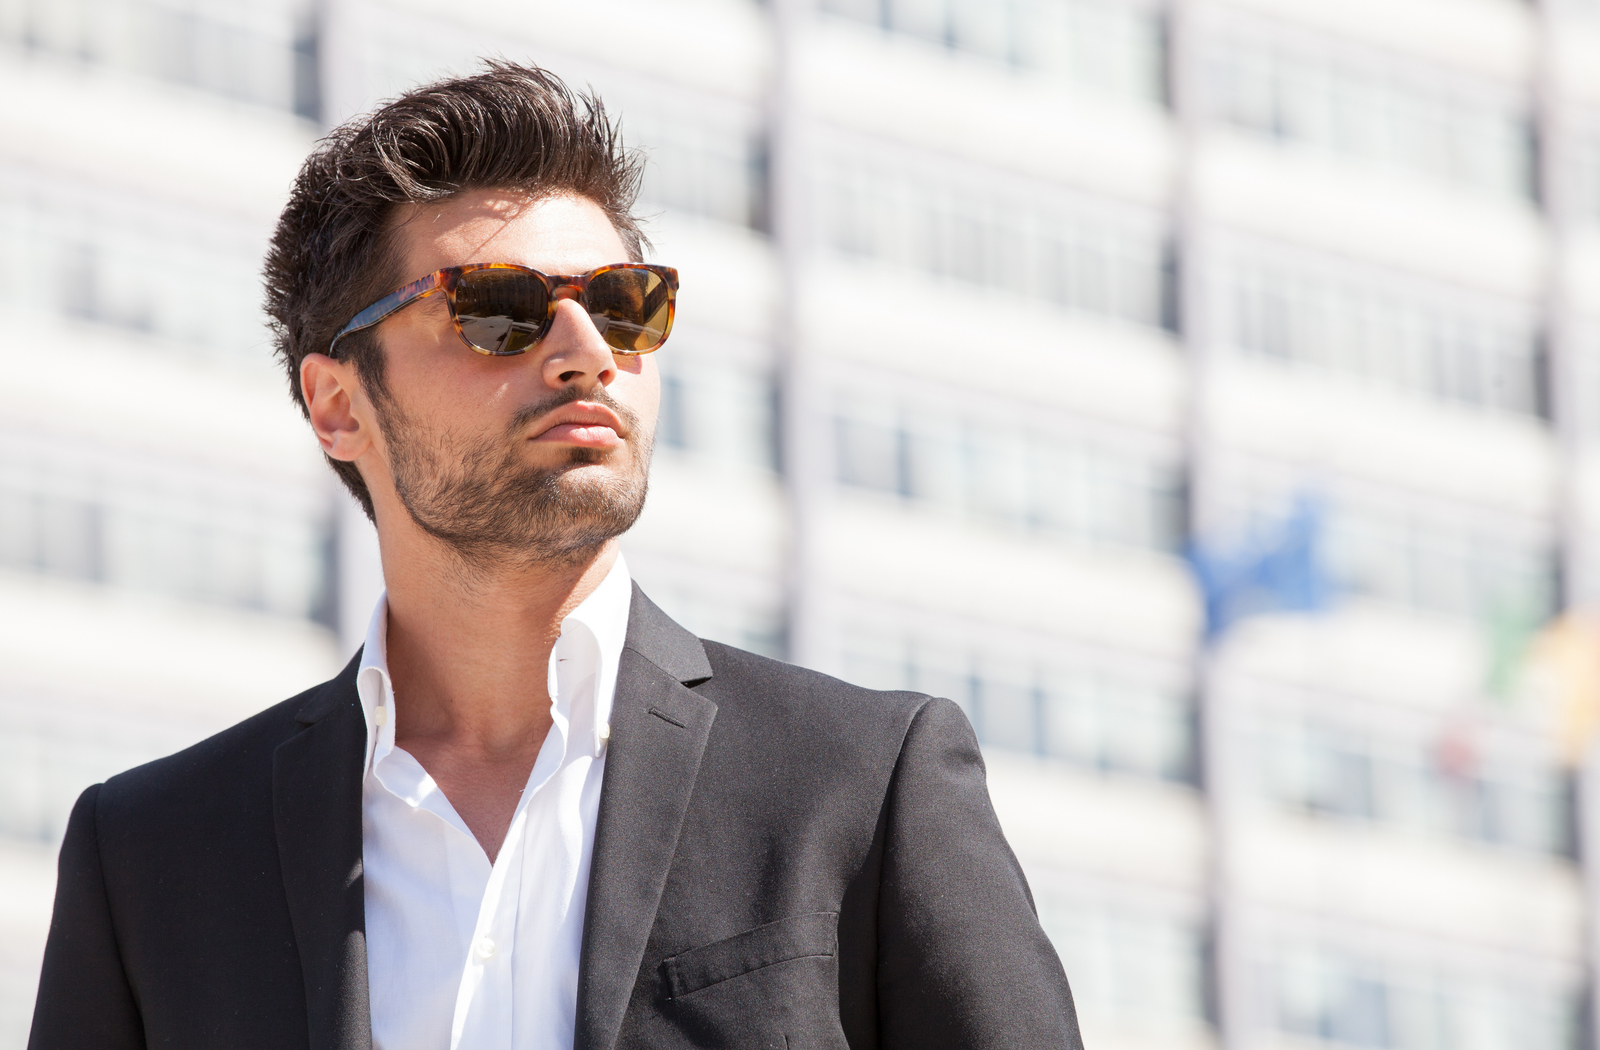 Young professional man in suit wearing sunglasses to protect eyes while outside in the sun